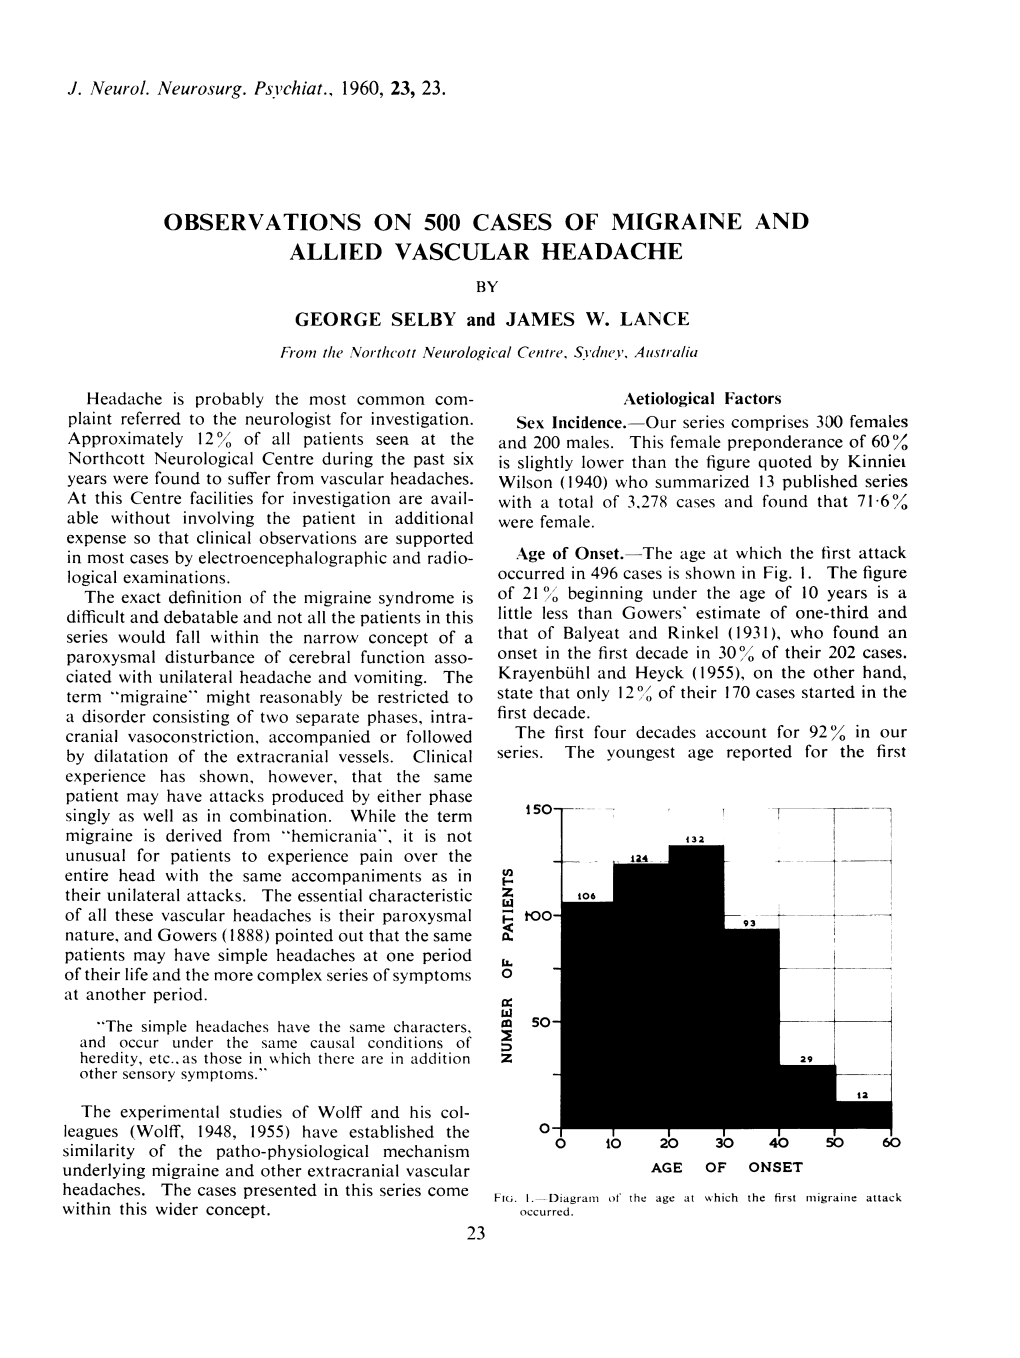 OBSERVATIONS on 500 CASES of MIGRAINE and ALLIED VASCULAR HEADACHE by GEORGE SELBY and JAMES W